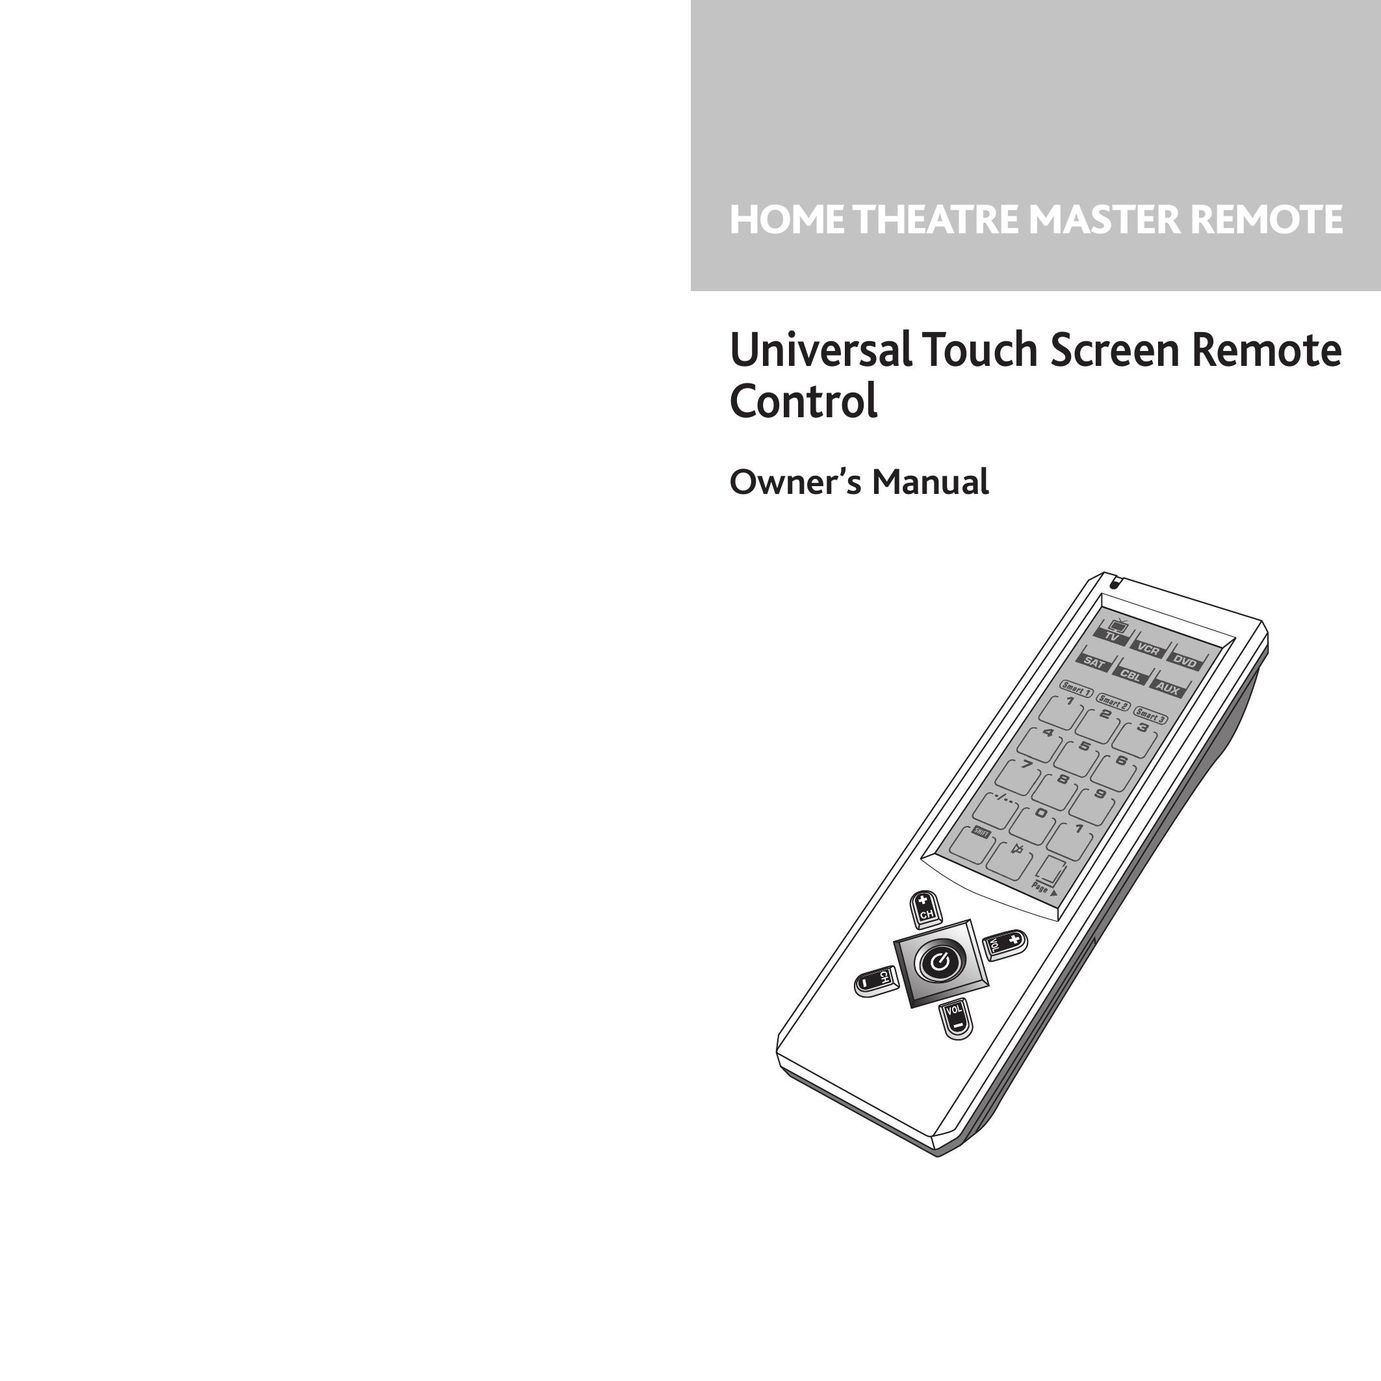 Home Theater Direct Universal Touch Screen Remote Control Universal Remote User Manual